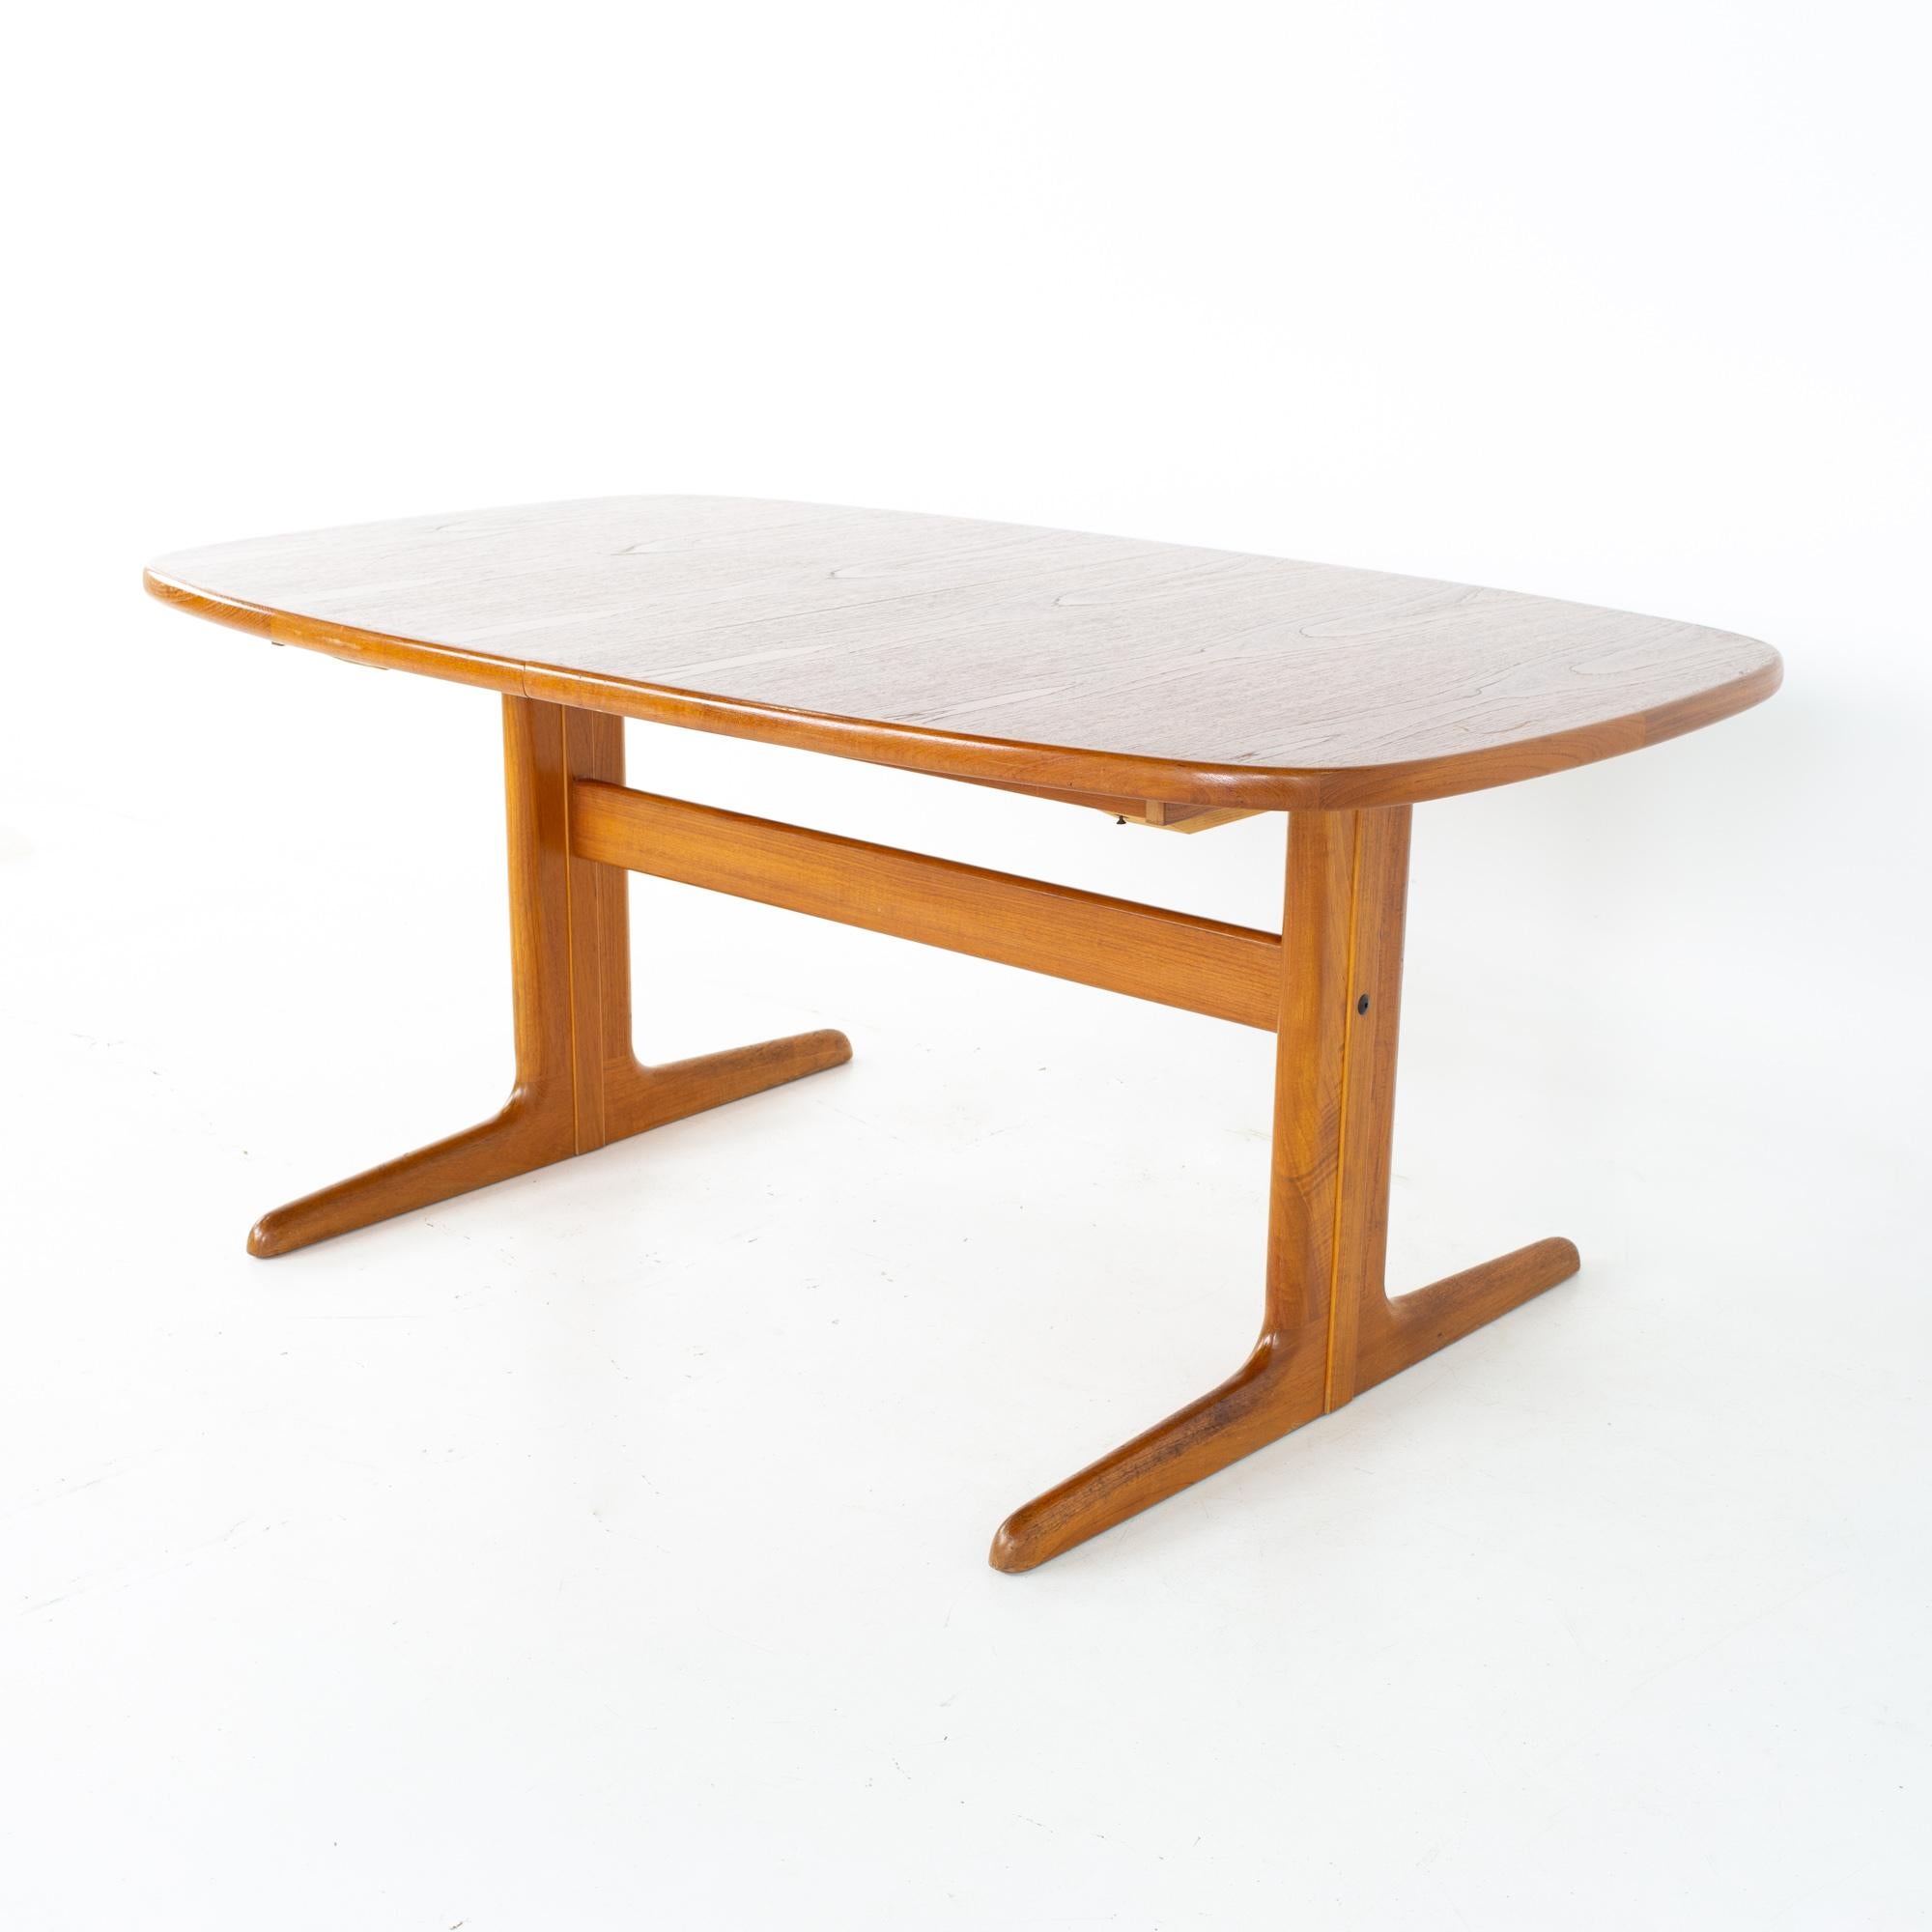 Skovby Møbelfabrik mid century teak oval expanding 10 person dining table.
Table measures: 65 wide x 39.5 deep x 28 inches high 

All pieces of furniture can be had in what we call restored vintage condition. That means the piece is restored upon